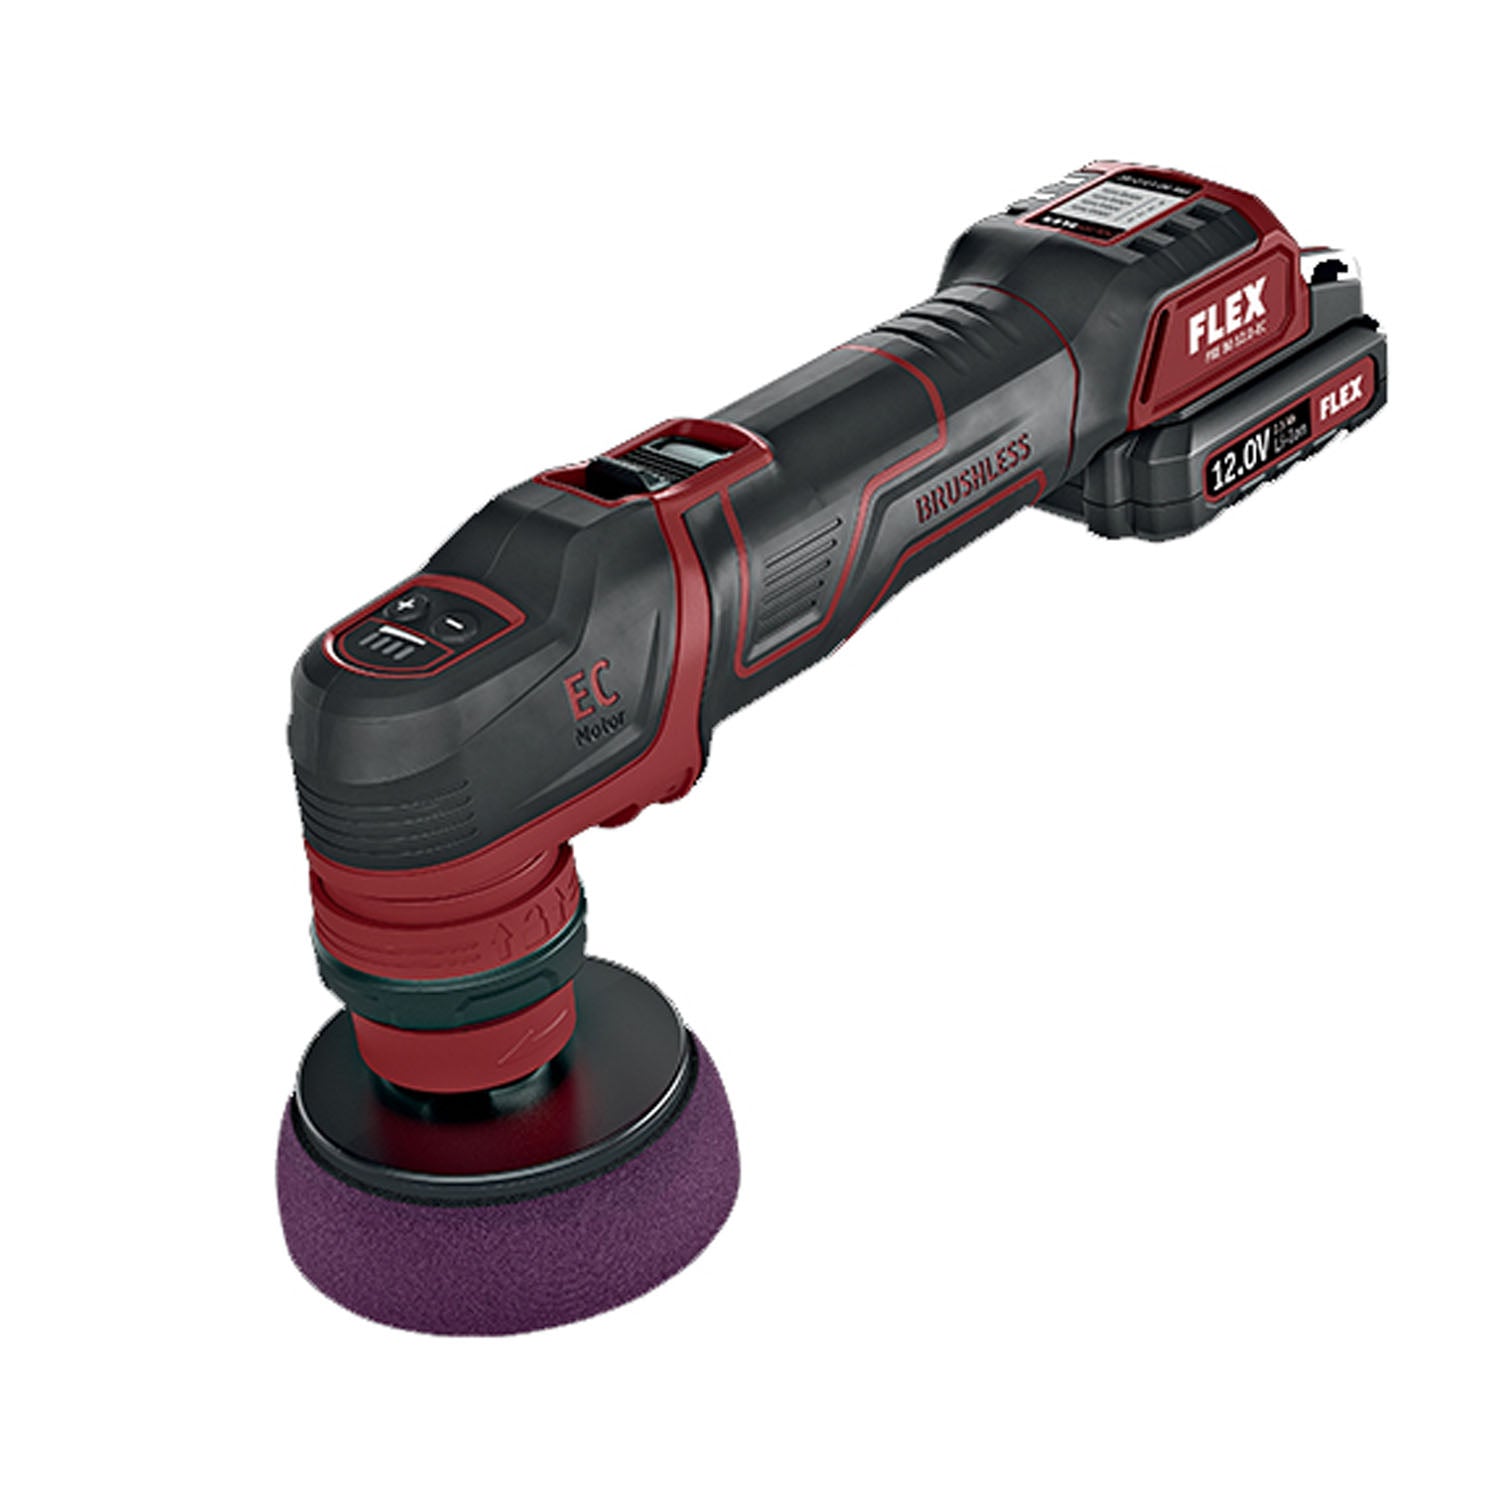 flex-pxe80-cordless-polisher-with-3-inch-backing-plate